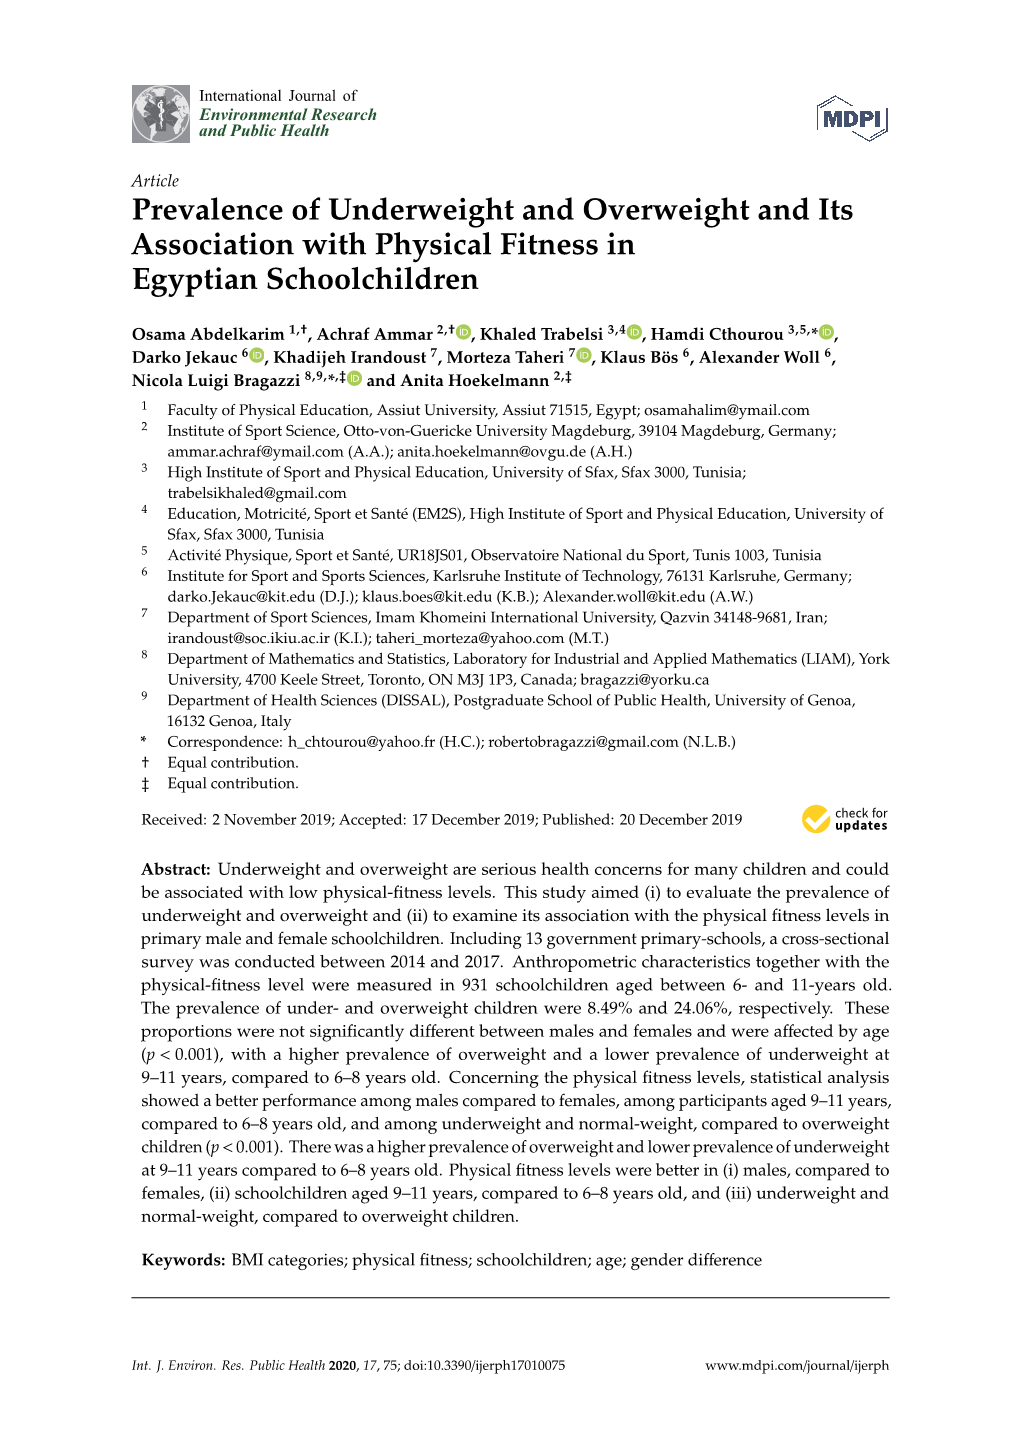 Prevalence of Underweight and Overweight and Its Association with Physical Fitness in Egyptian Schoolchildren